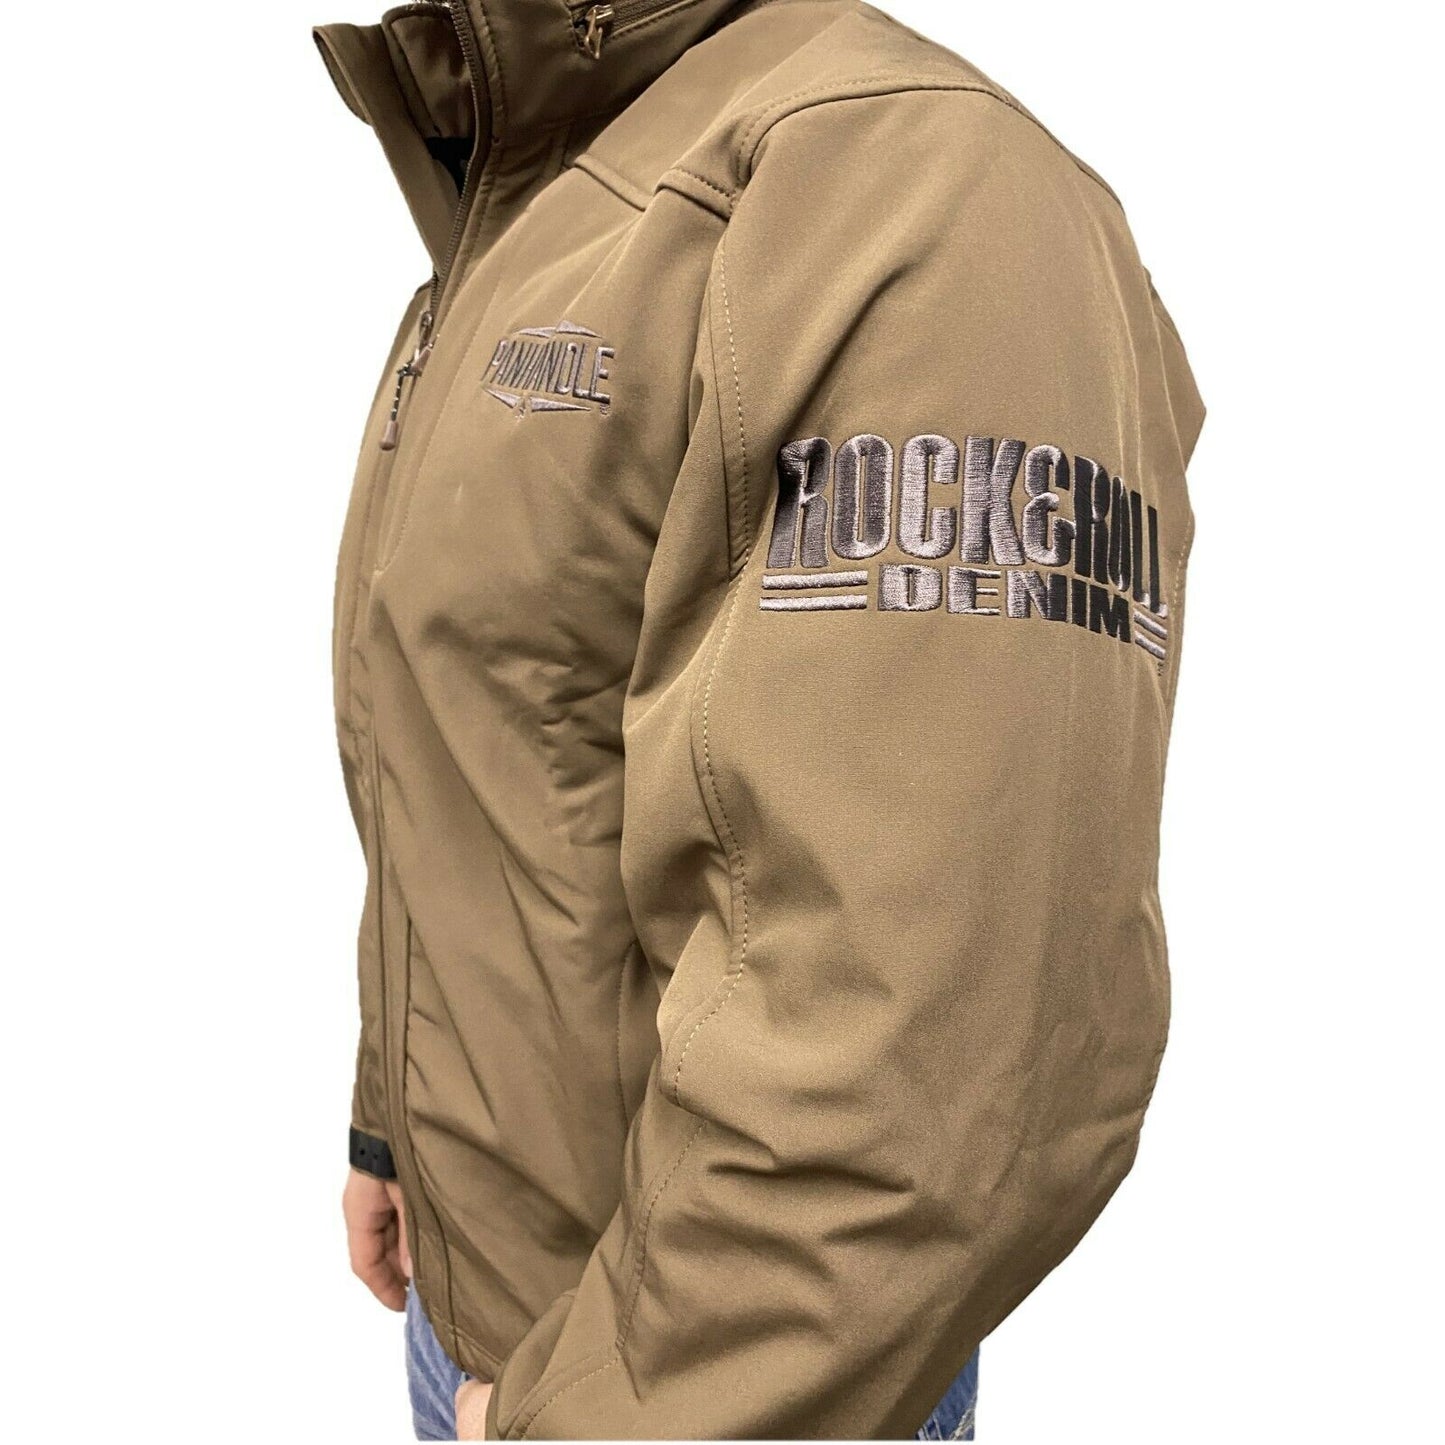 Powder River Outfitters Men's Brown Softshell Logo Jacket 92-9645-24